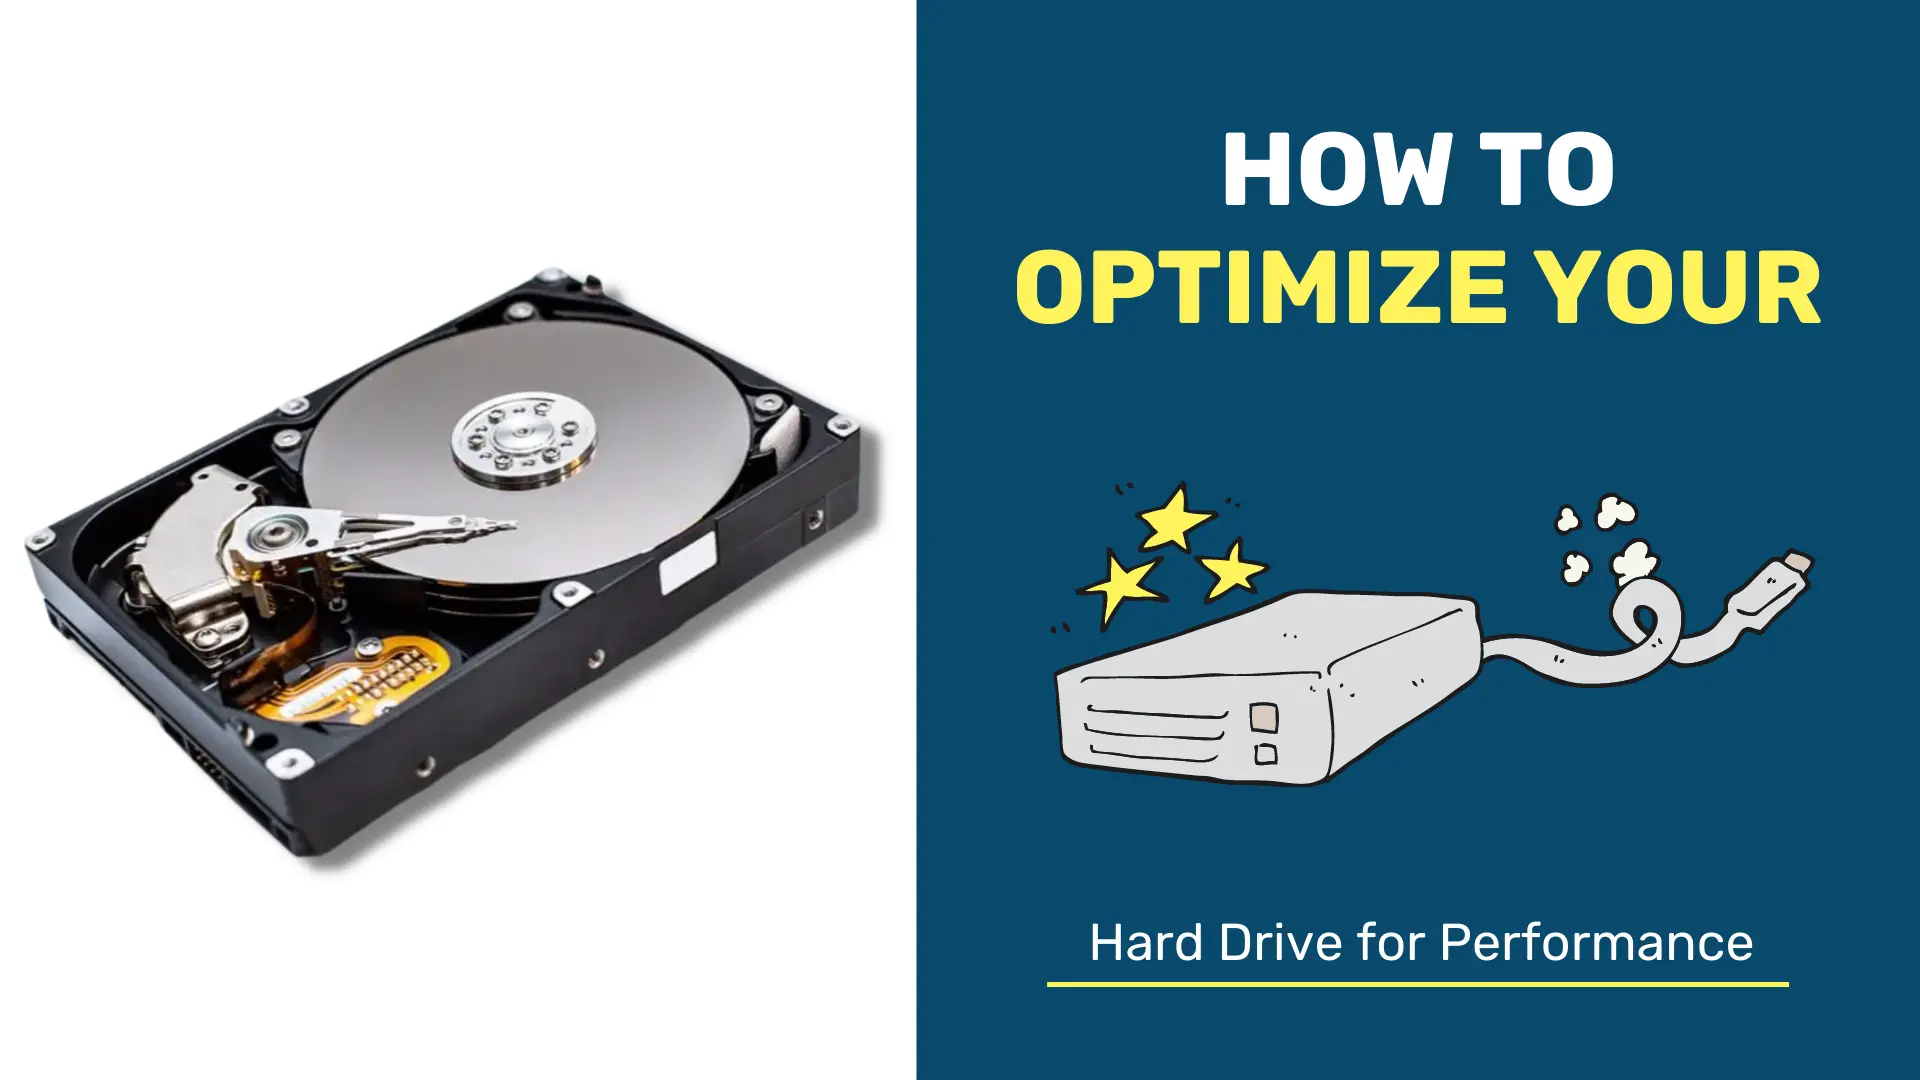 How To Optimize Your Hard Drive for Performance